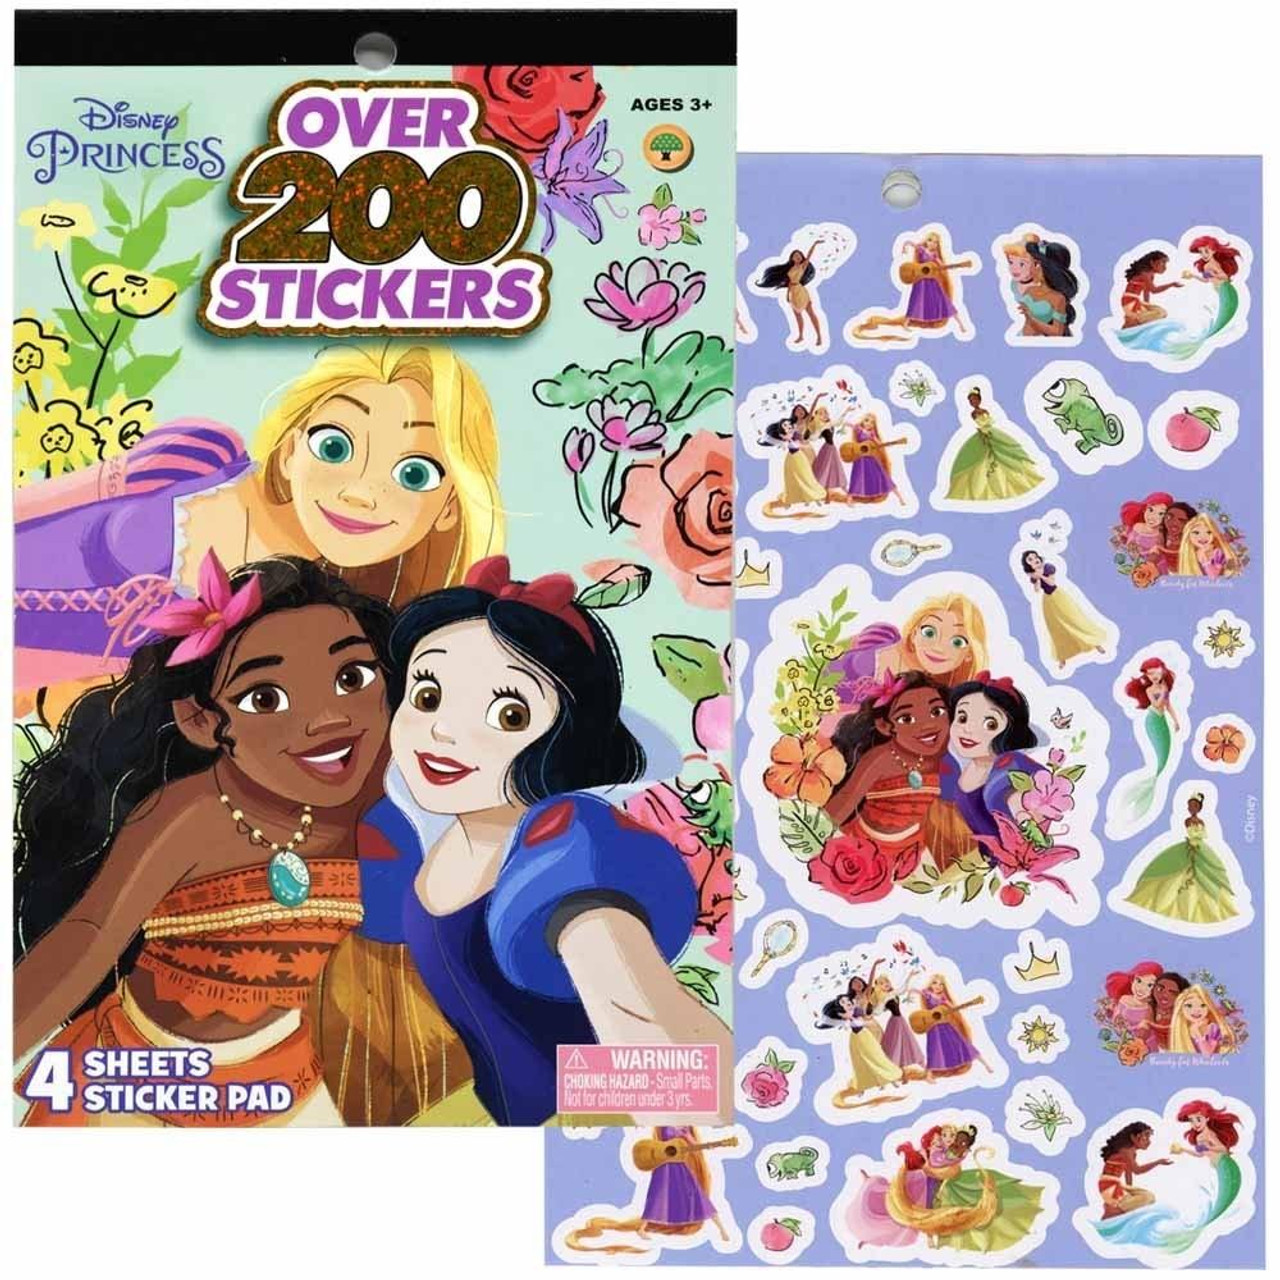 Disney Princess Sticker Book with Over 200 Stickers - Think Kids